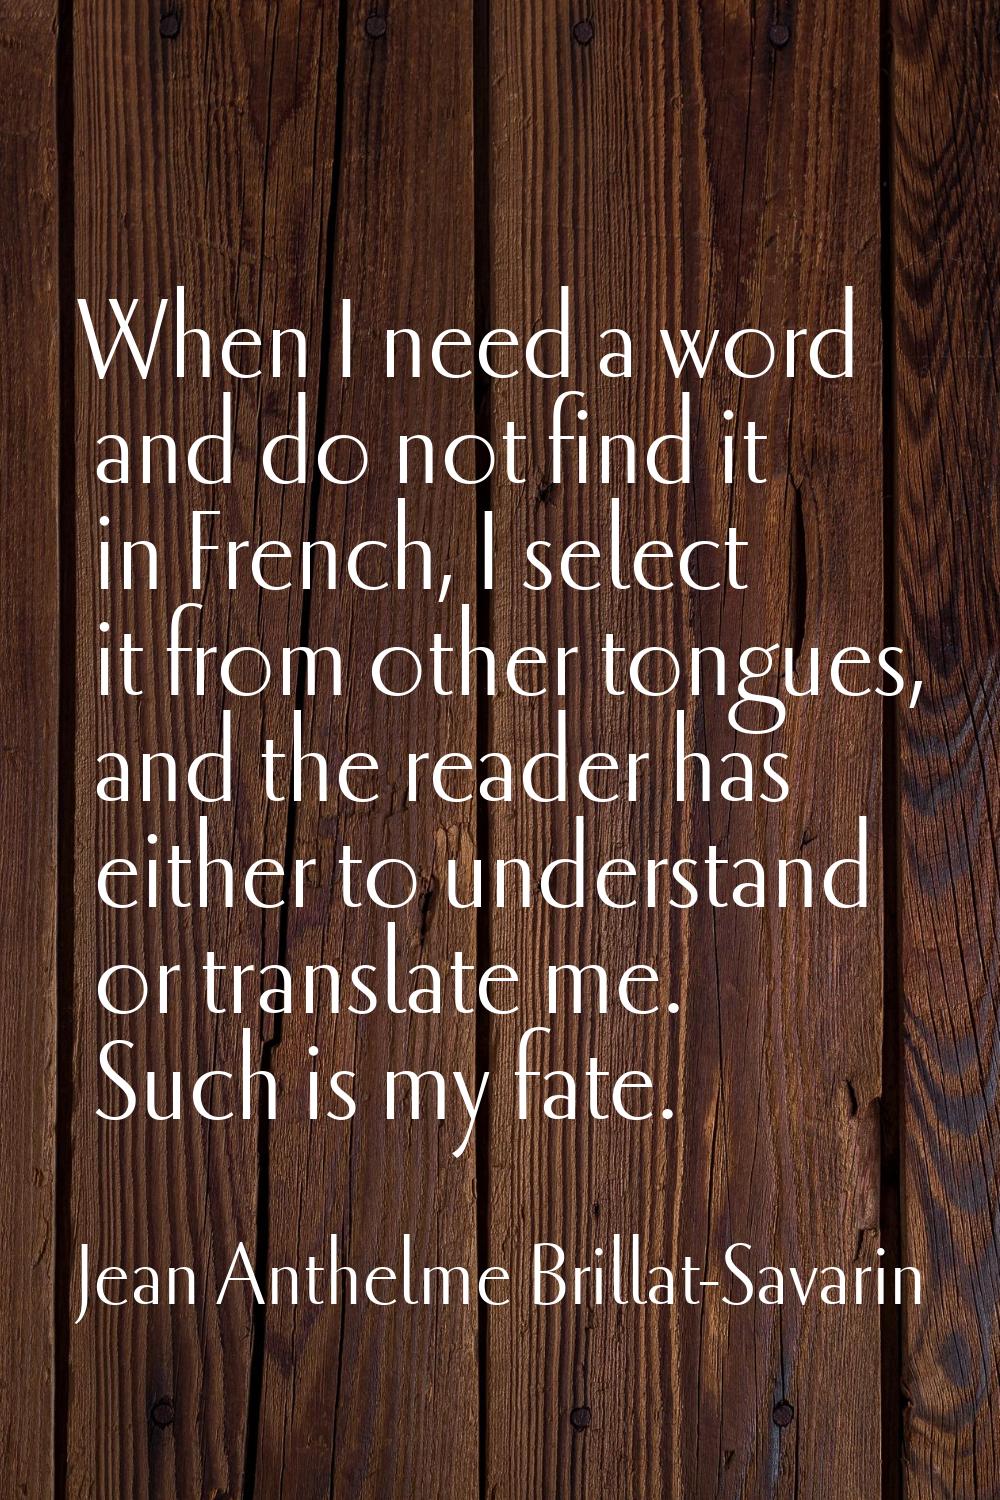 When I need a word and do not find it in French, I select it from other tongues, and the reader has